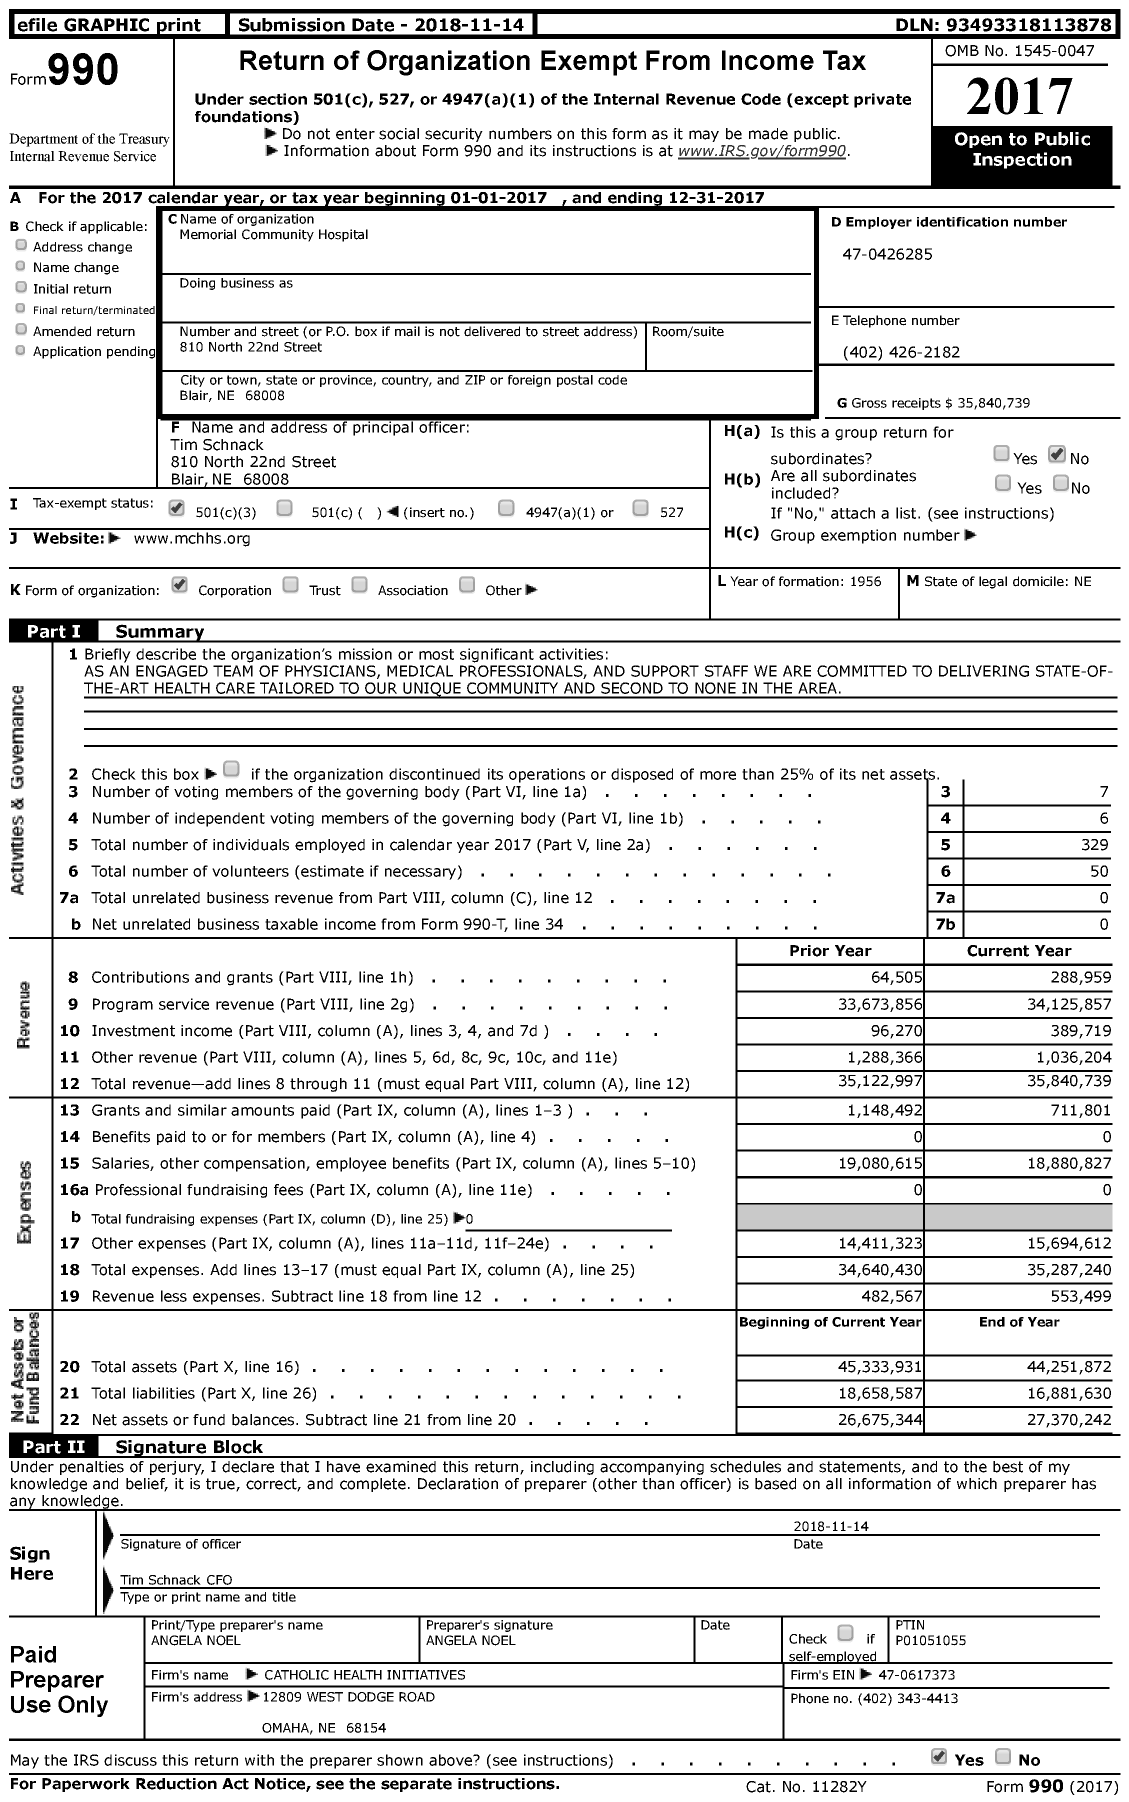 Image of first page of 2017 Form 990 for Memorial Community Hospital (MCH&HS)